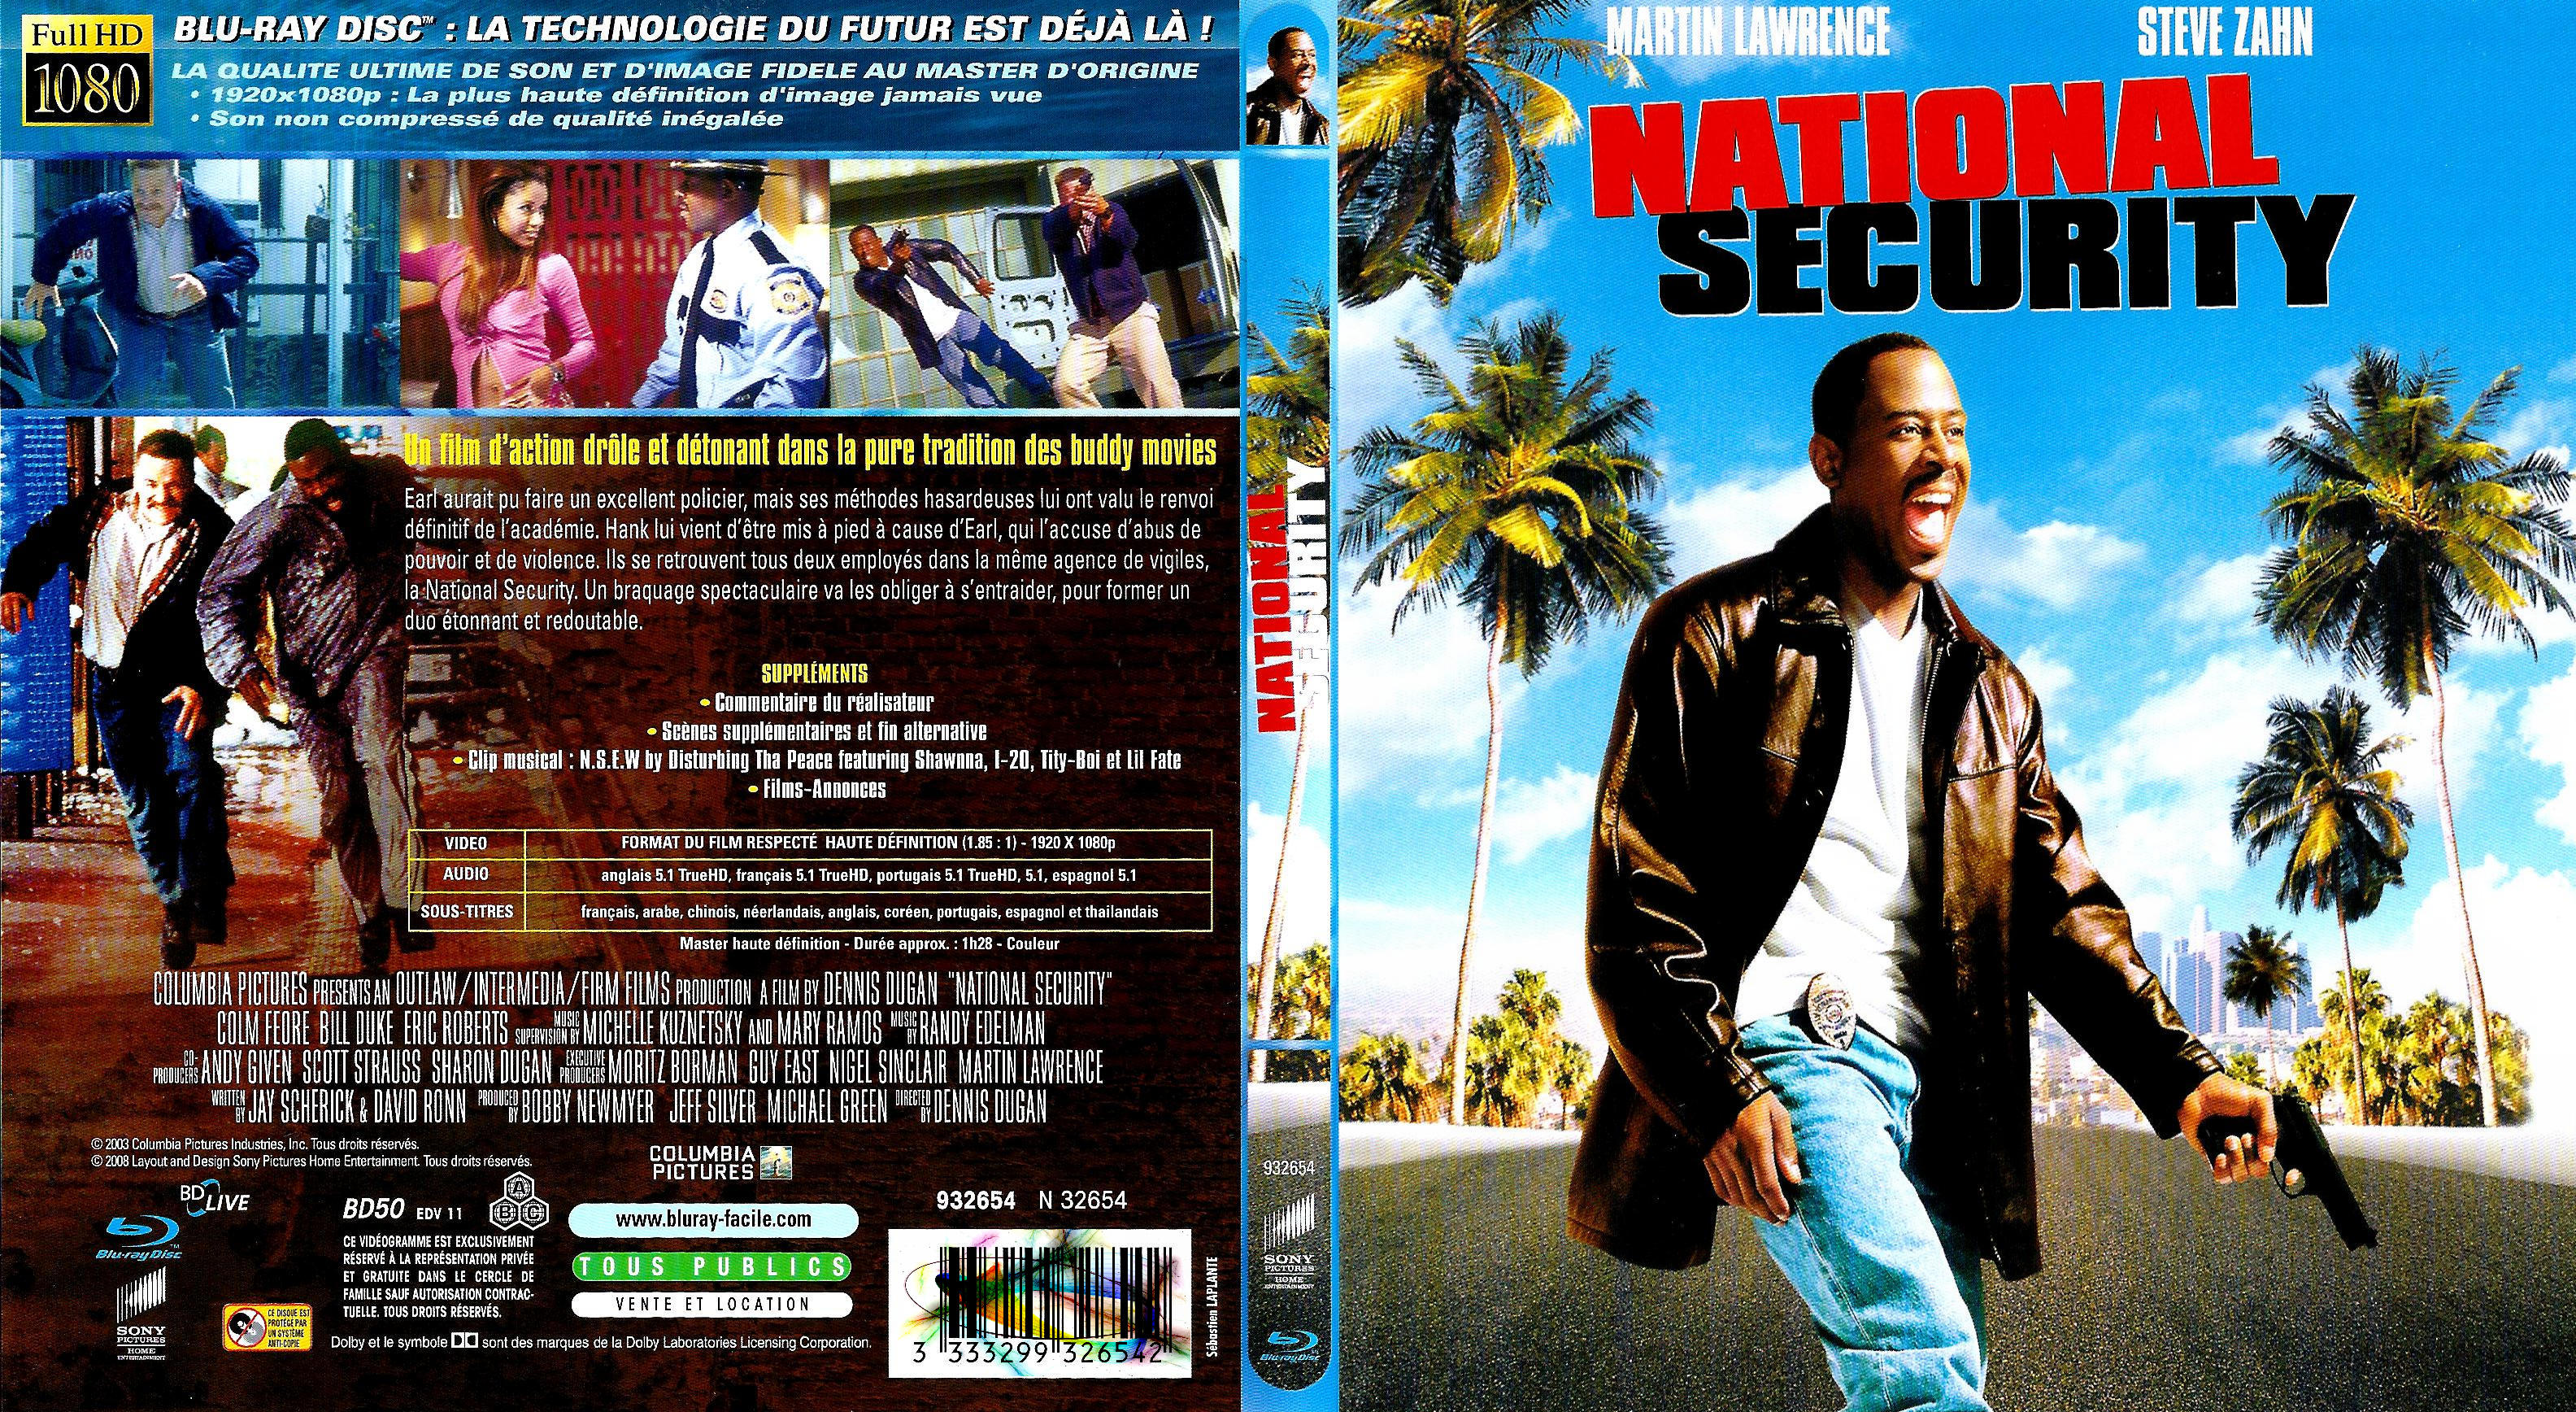 Jaquette DVD National security (BLU-RAY)